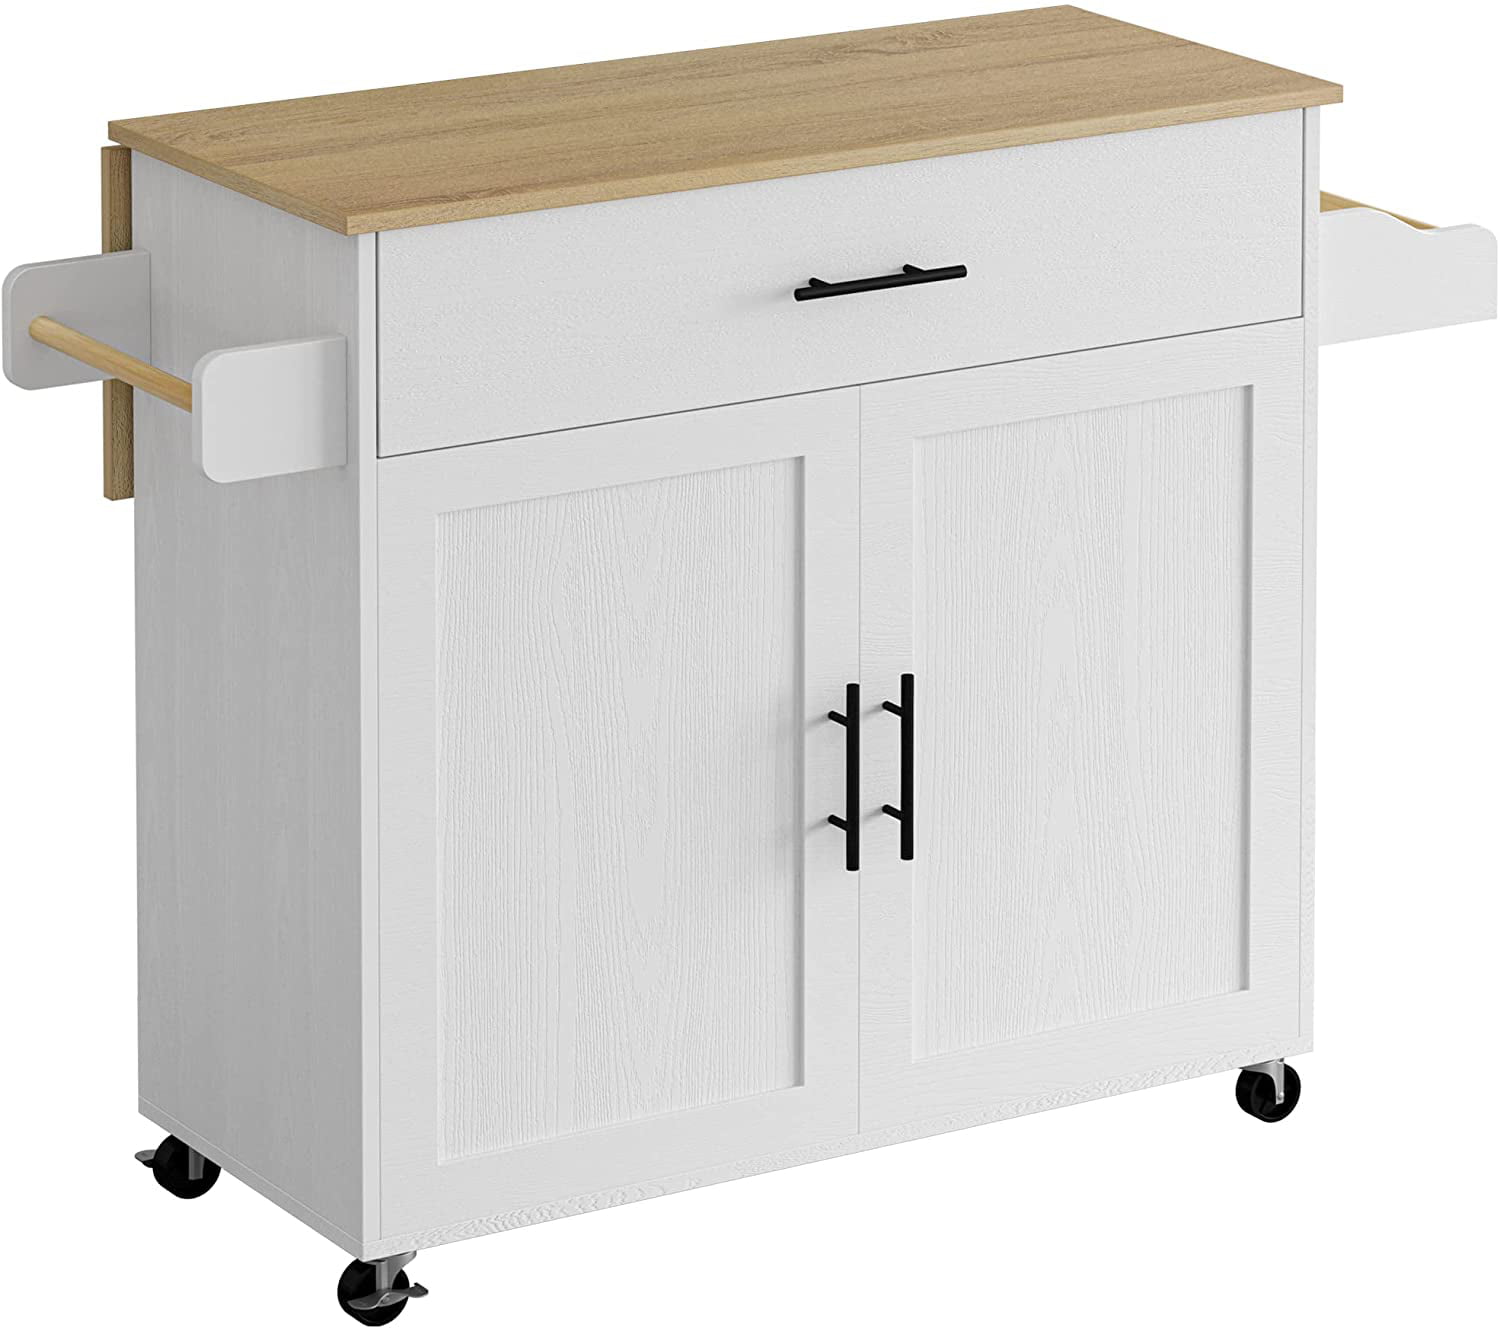 IRONCK  Rolling Kitchen Island with Storage， with Storage Cabinet， Drawer， Spice Rack， Towel Rack， Kitchen Cart Table for Kitchen， White